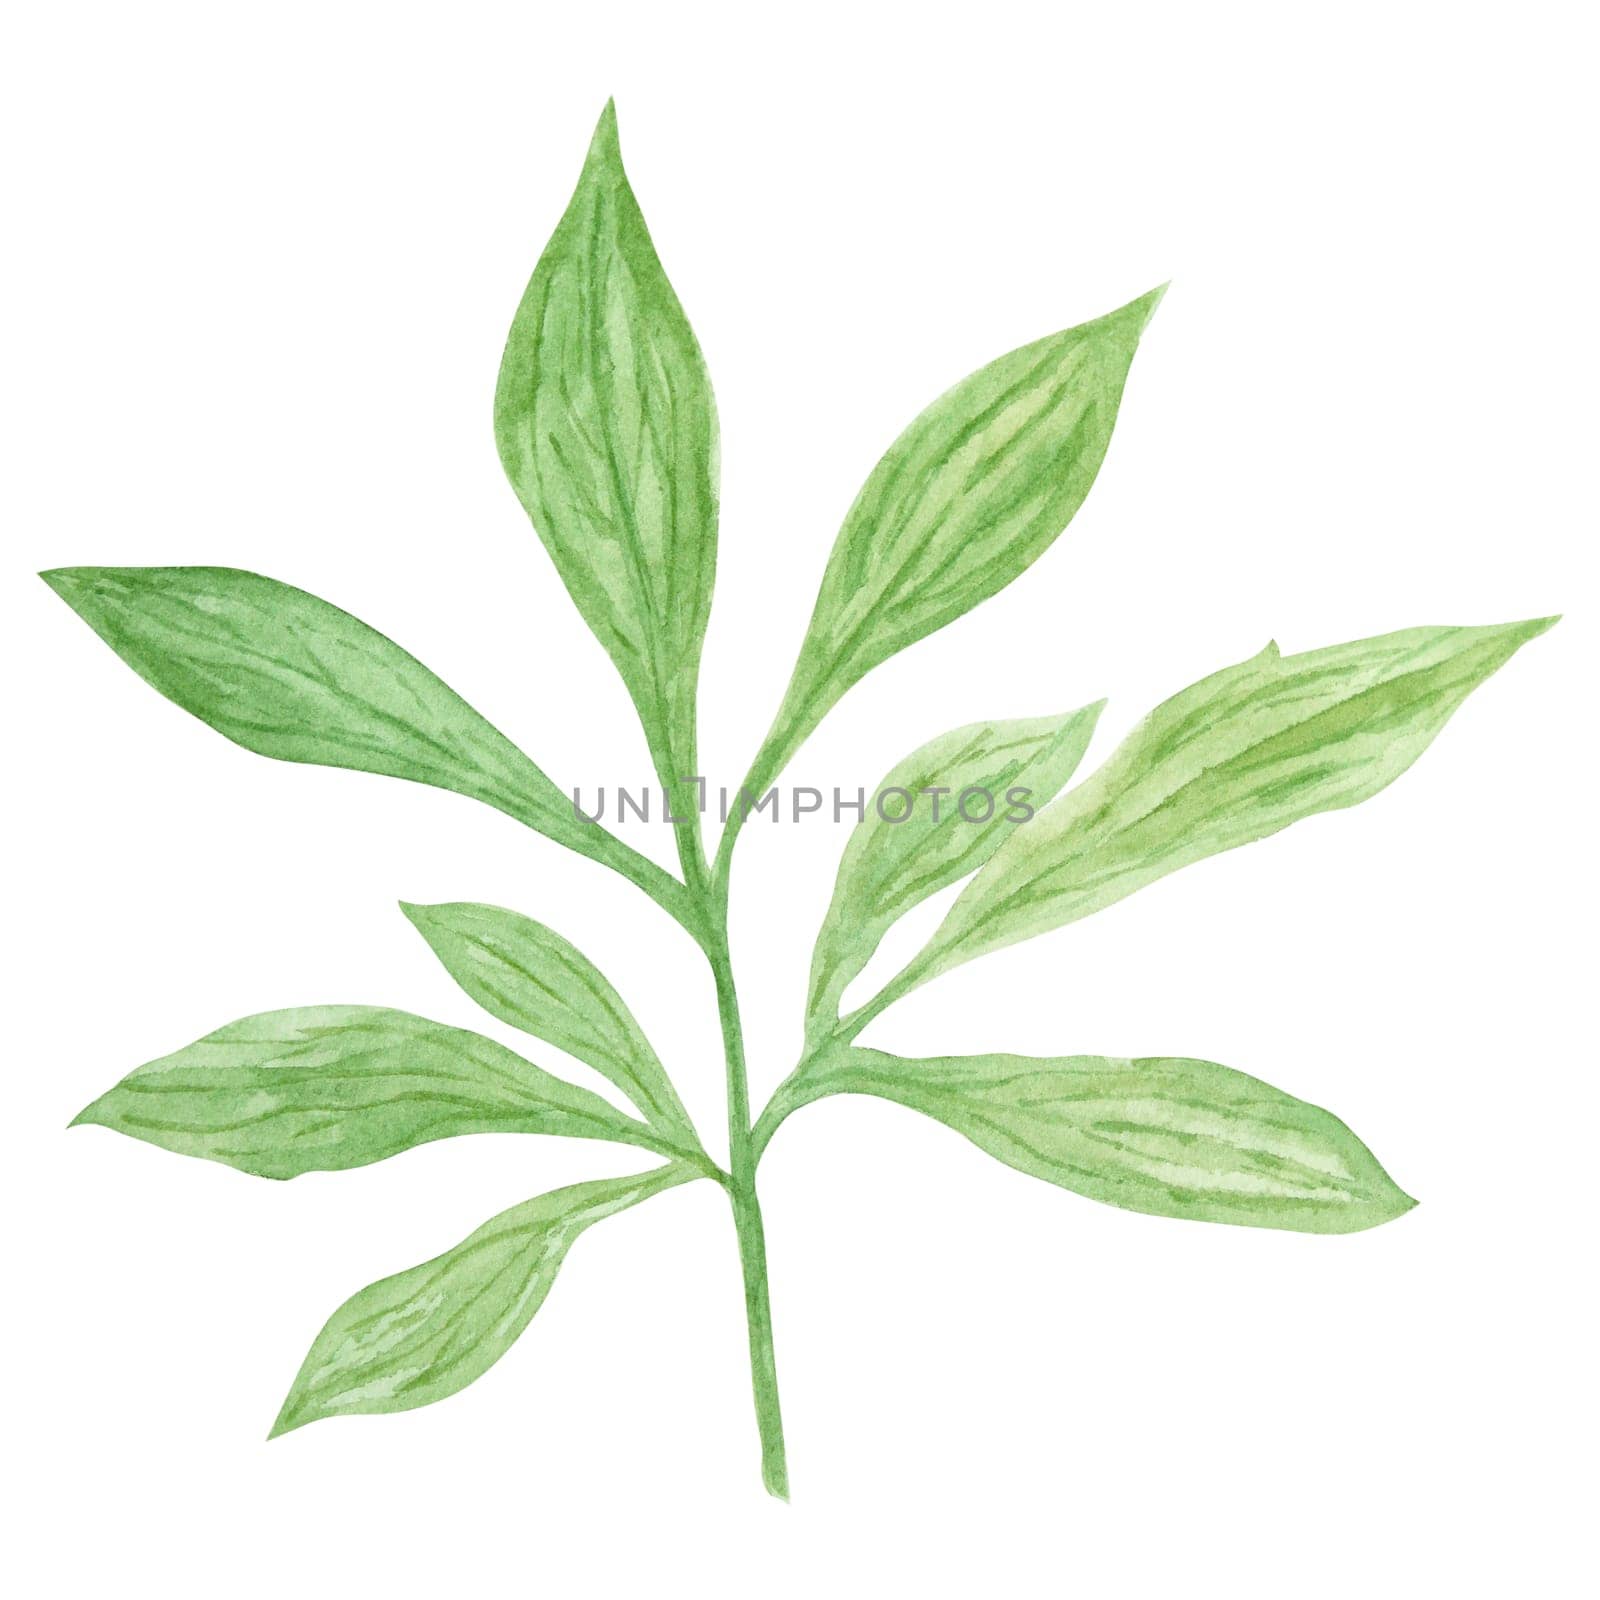 Peony leaves watercolor hand drawn painting. Realistic botanical clipart, floral arrangement. Chinese national symbol illustration. Perfect for card design, wedding invitation, print, textile, packing.